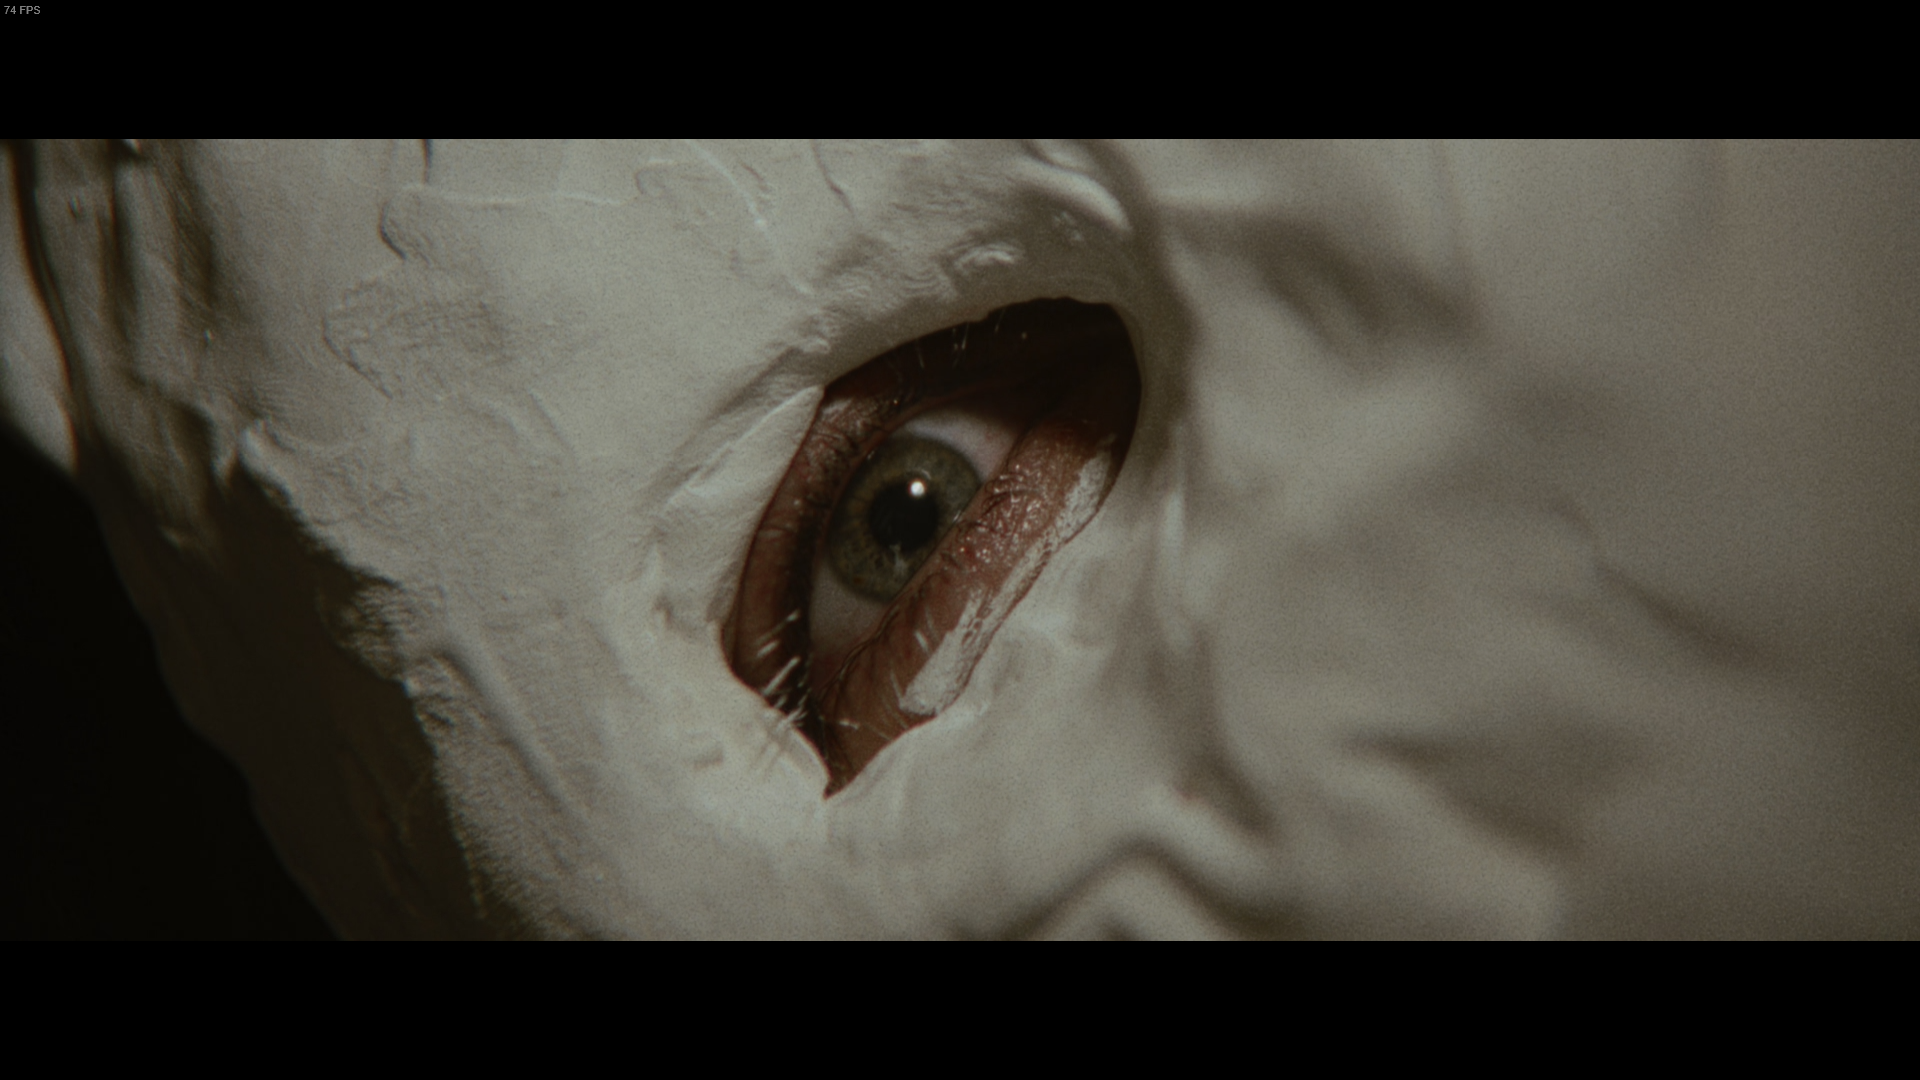 A close-up of Carl Goodman's eye while wearing a mask in second Marissa Marcel film, Minsky, in Immortality